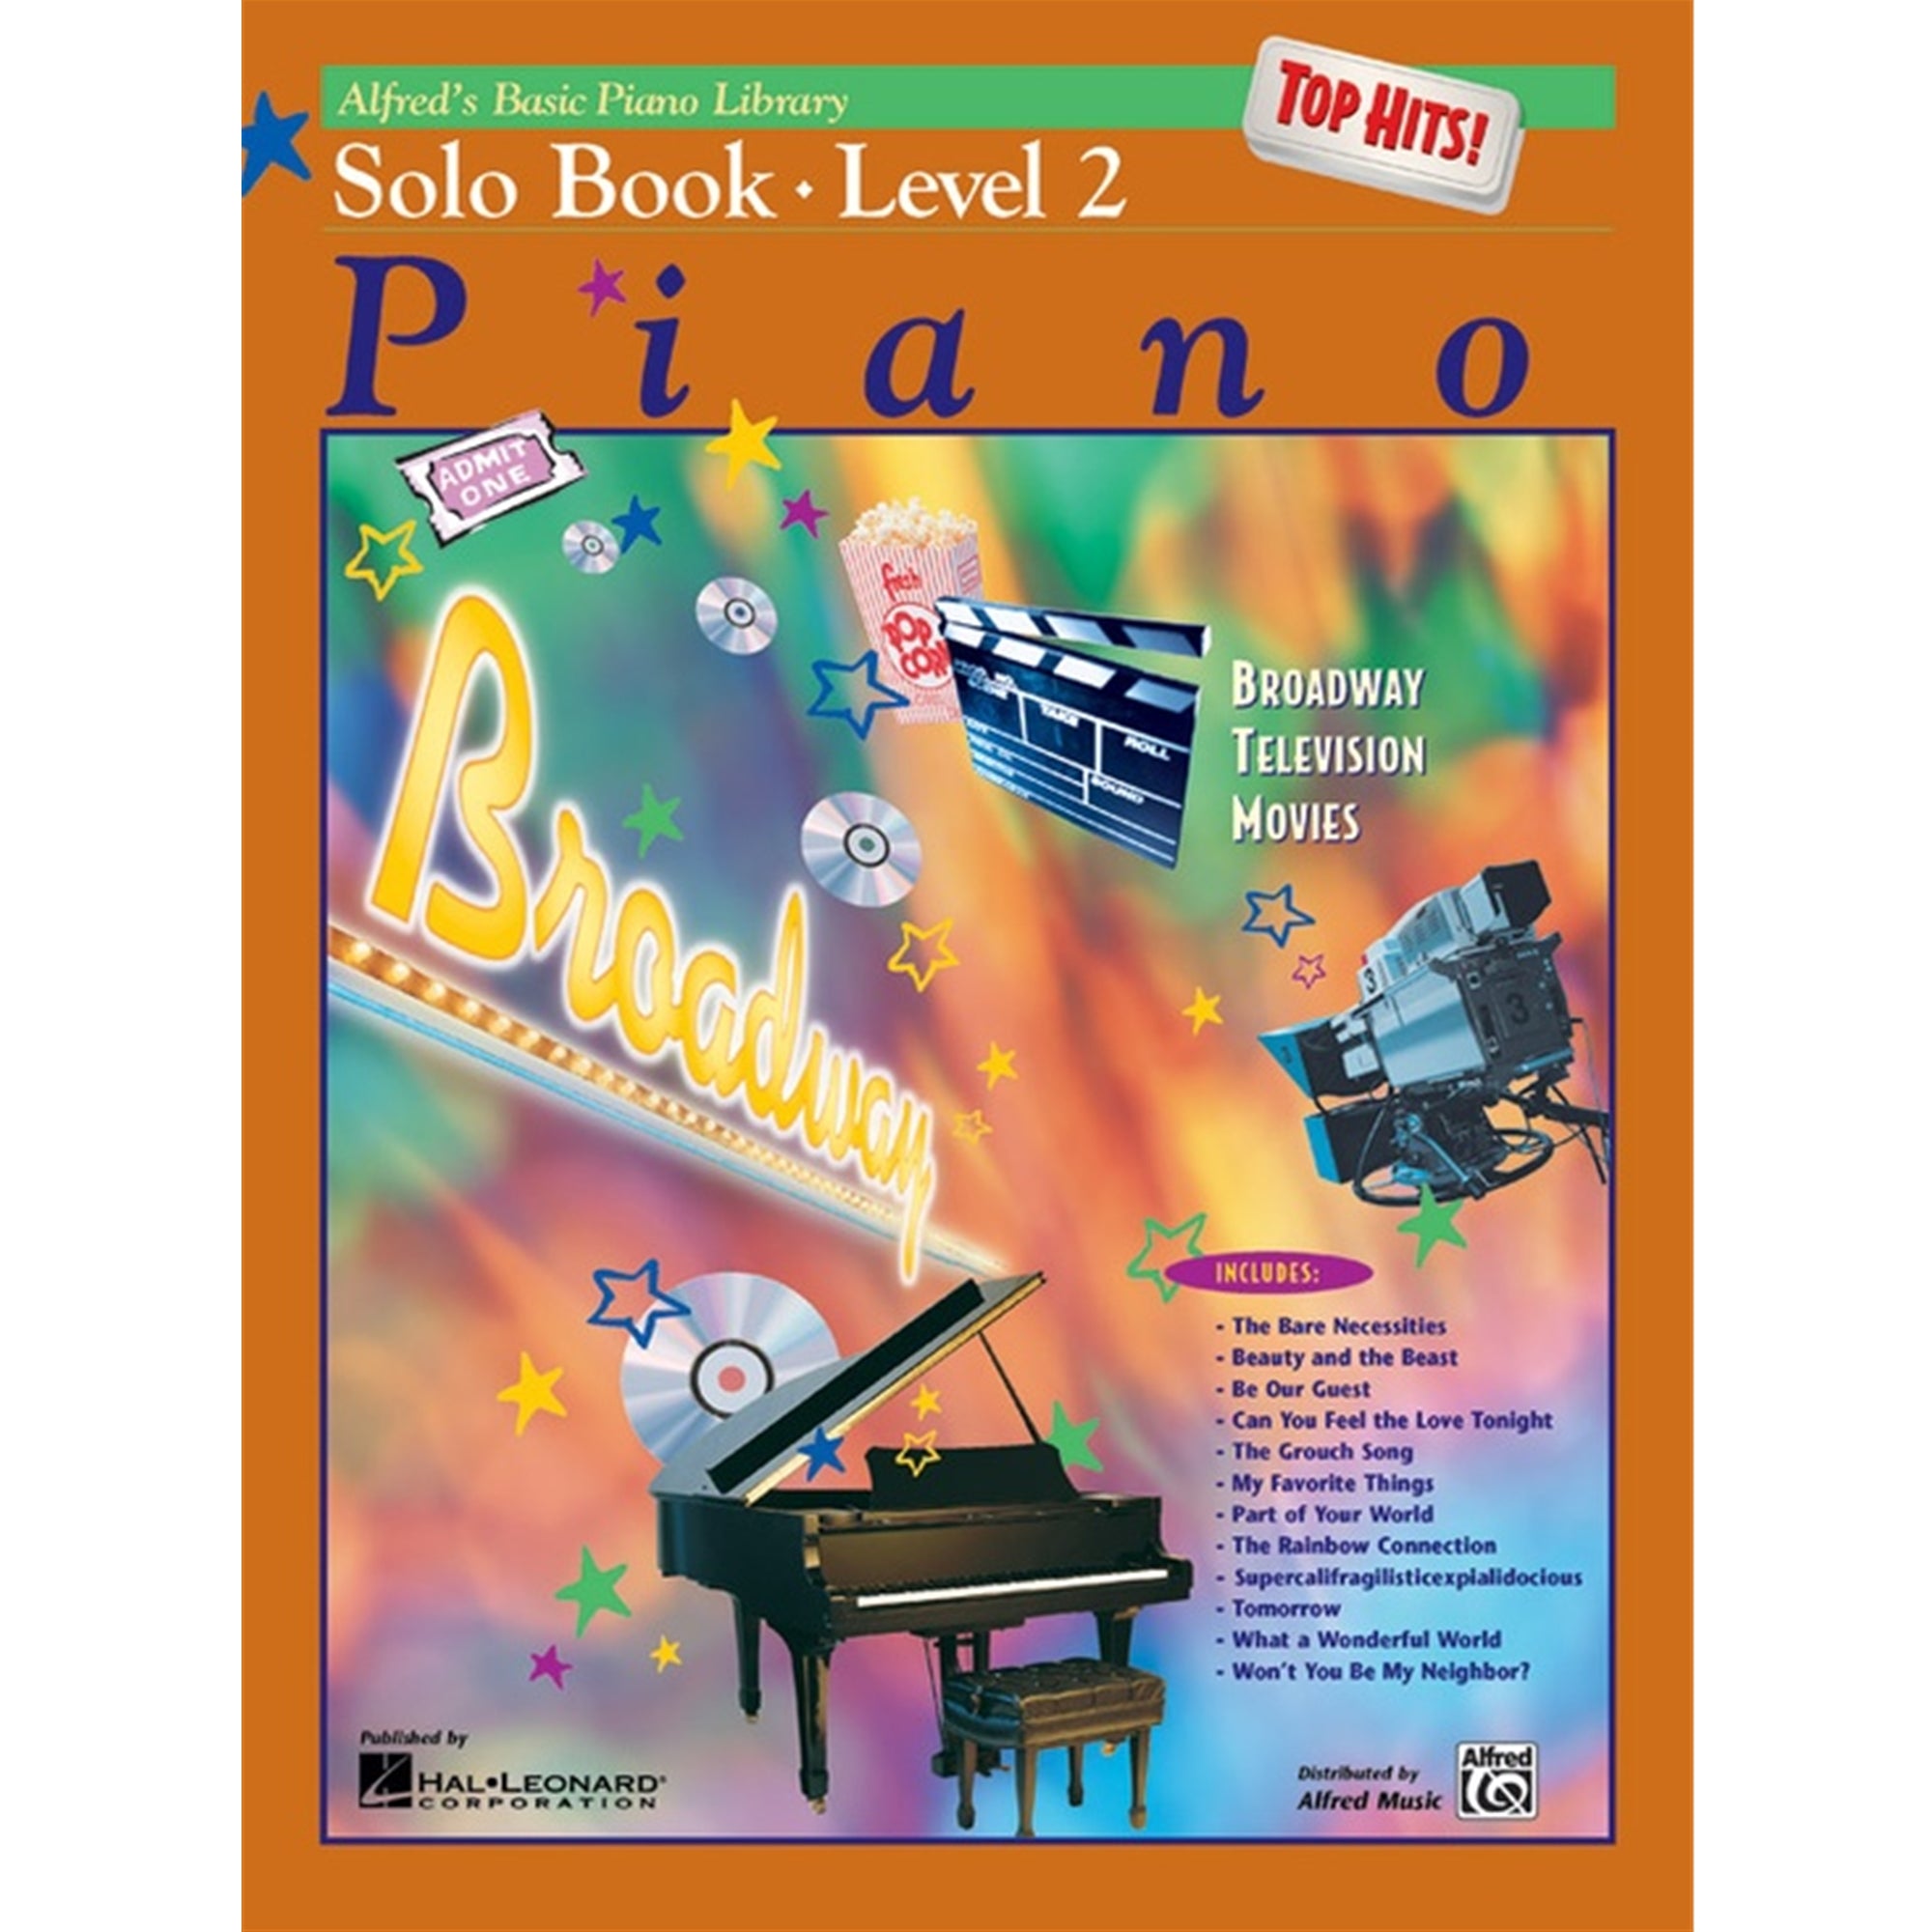 ALFRED 16497 Alfred's Basic Piano Library: Top Hits! Solo Book 2